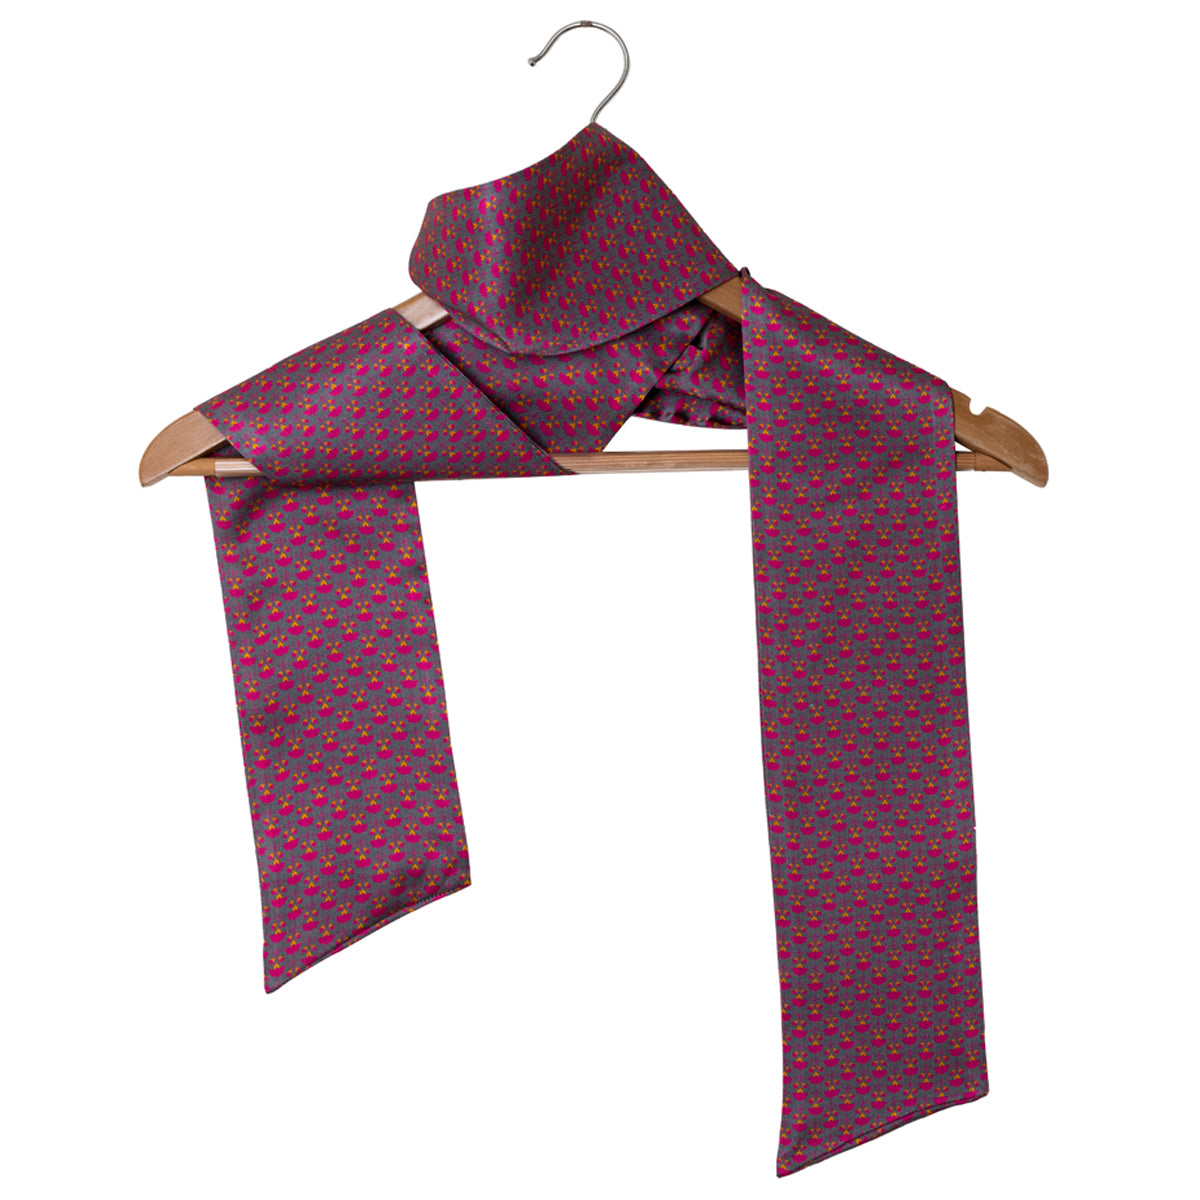 Chokore Special 4-in-1 Gift Set for Her (Silk Stole, Scarf, Sunglasses, & Necklace)